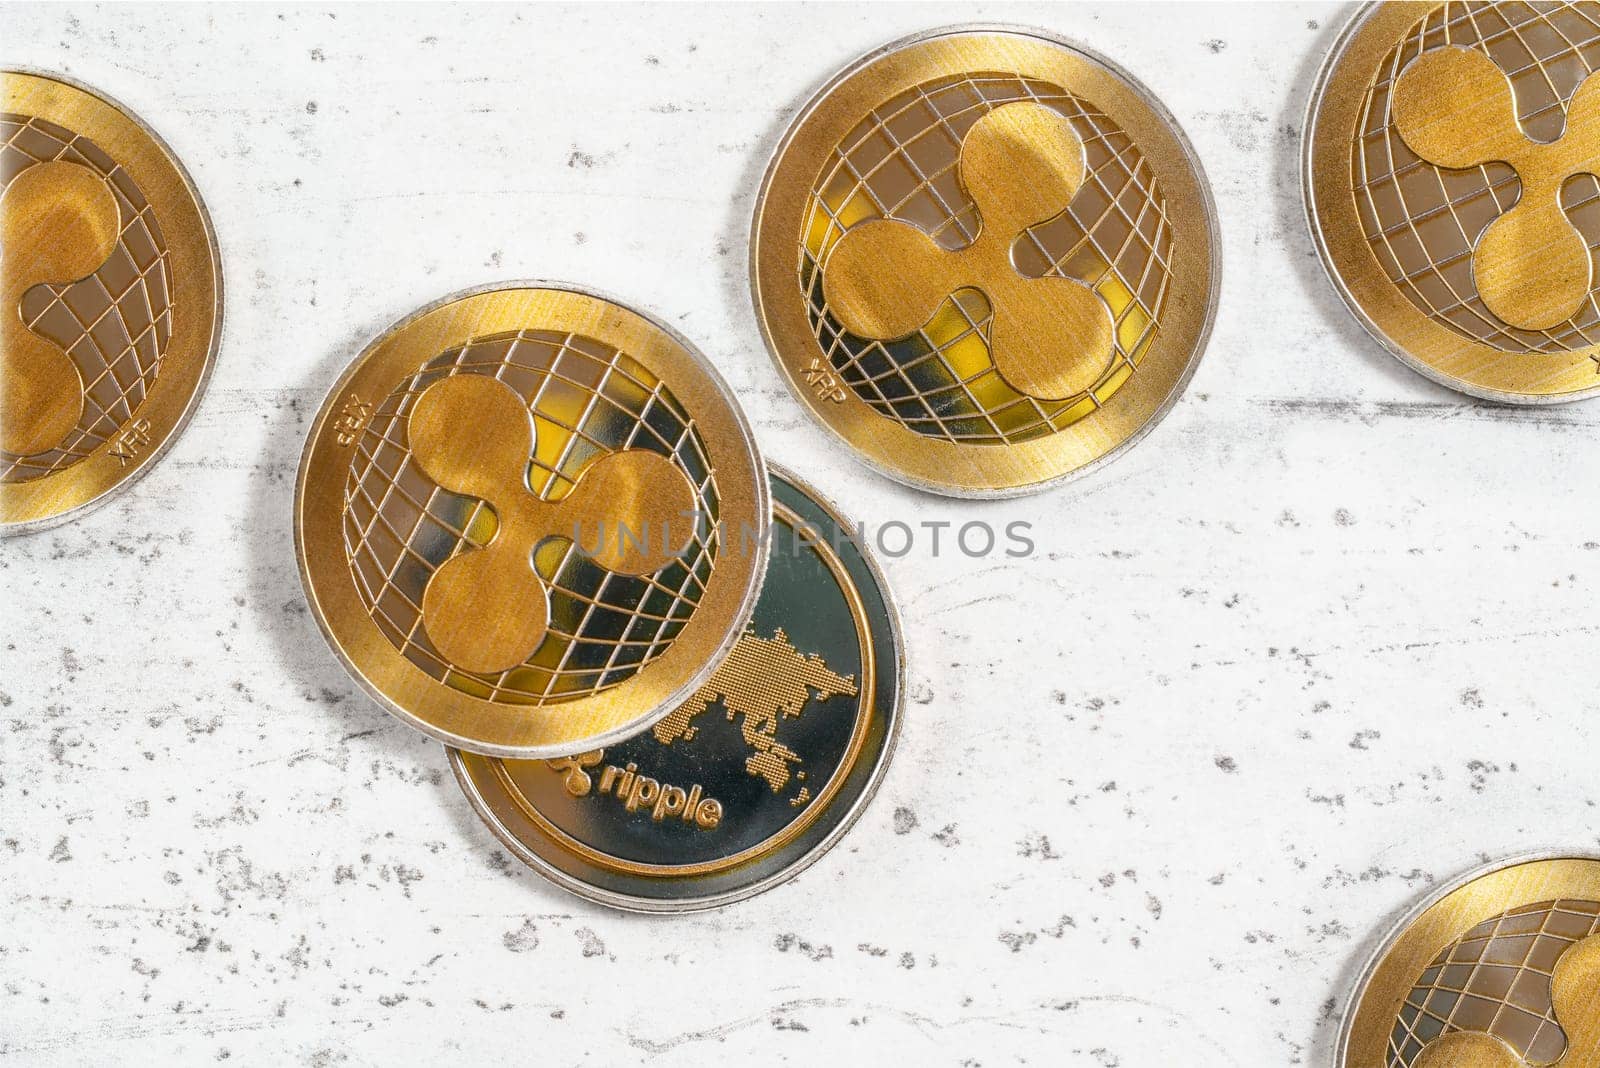 Top down view - XRP ripple cryptocurrency  golden coins on white stone like board by Ivanko